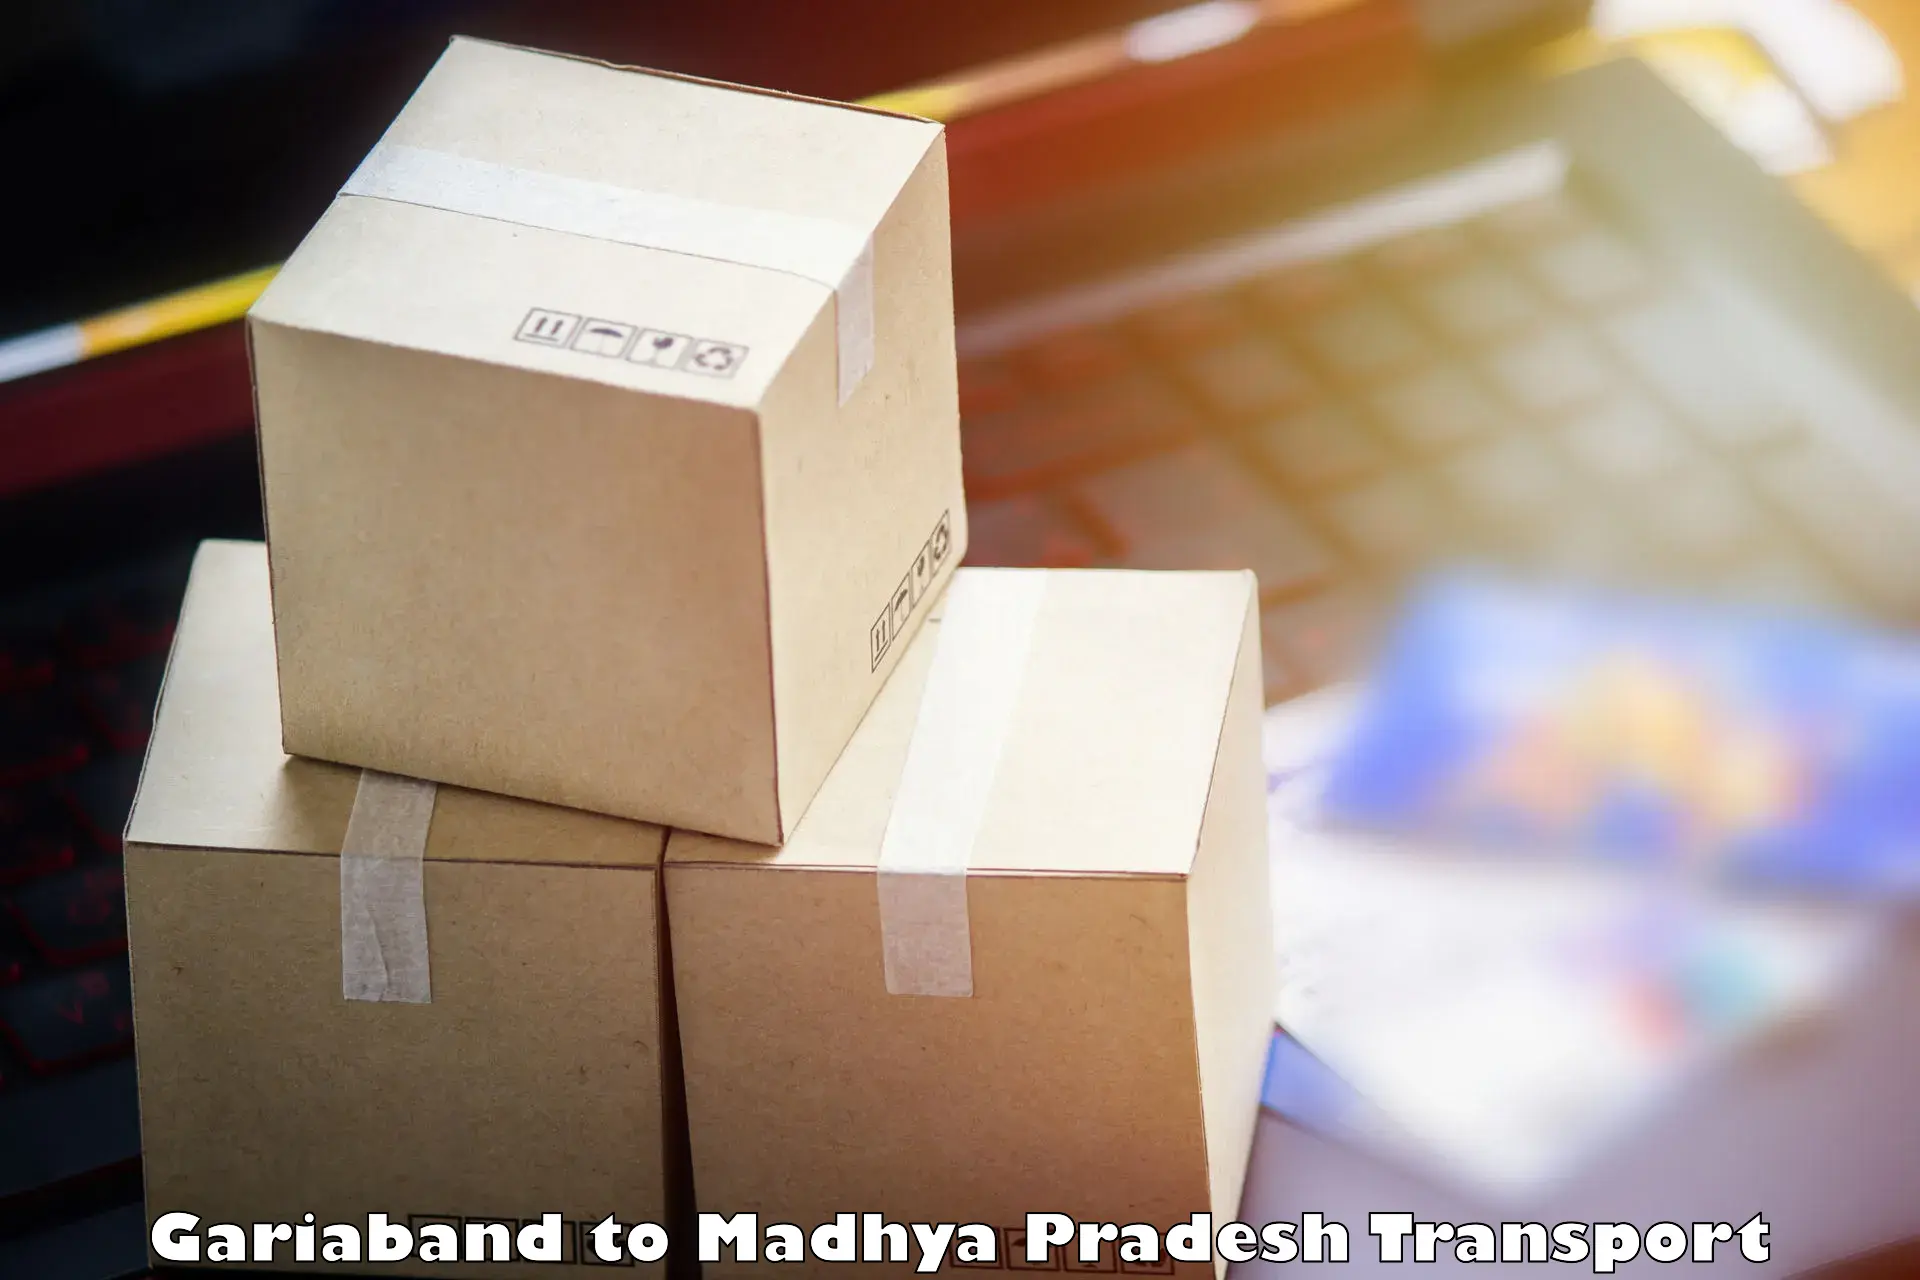 Road transport online services Gariaband to Jabalpur